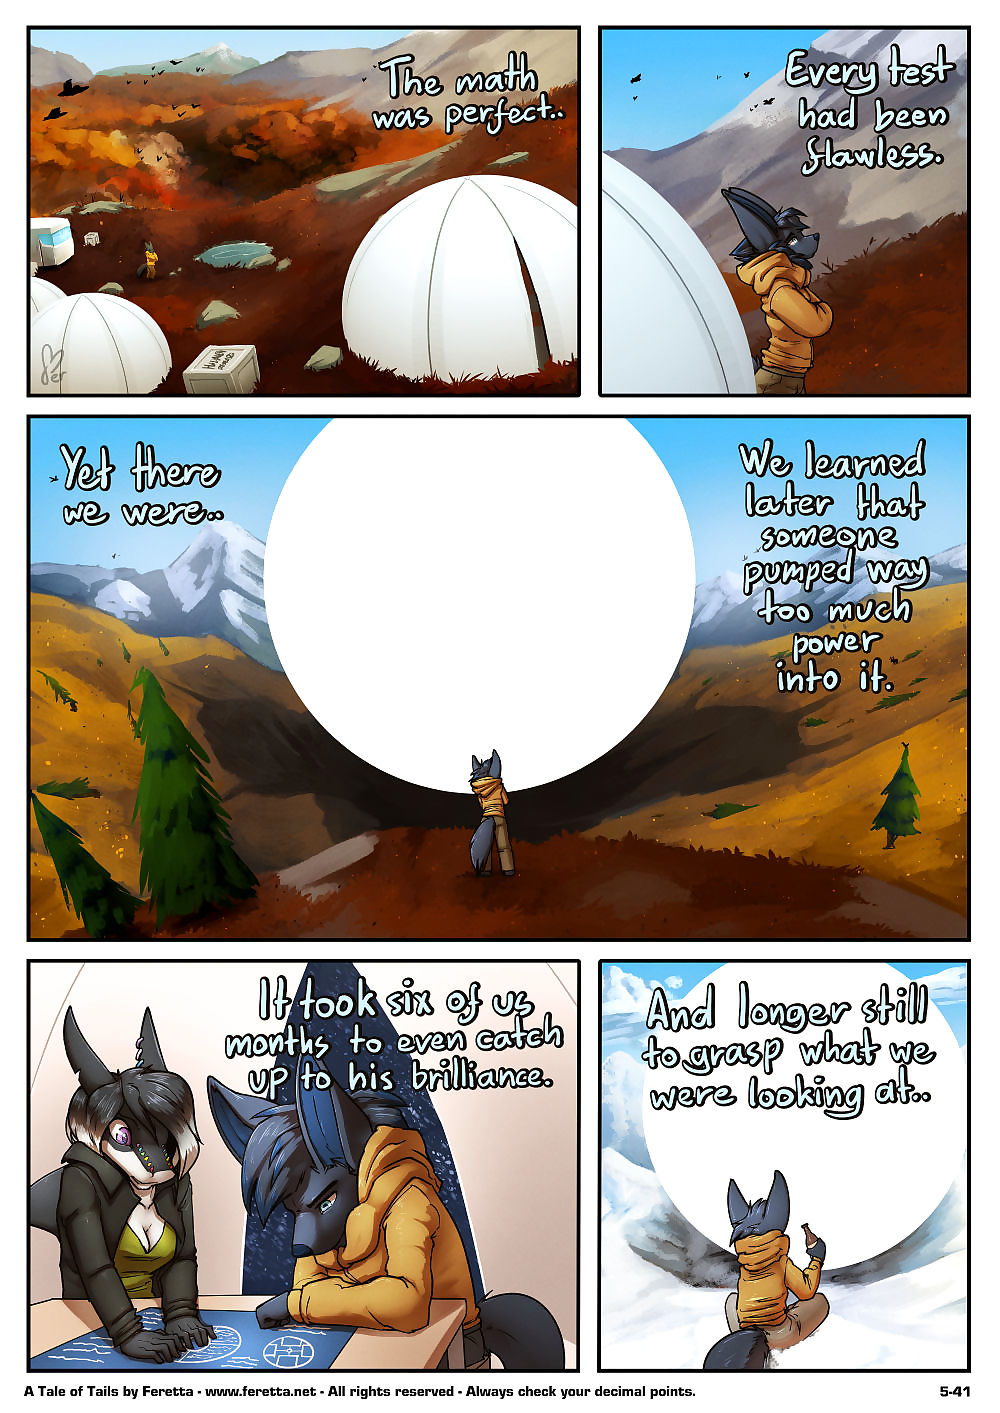 A Value for Tails: Scene 5 - A Blue planet for Misemployment - decoration 3